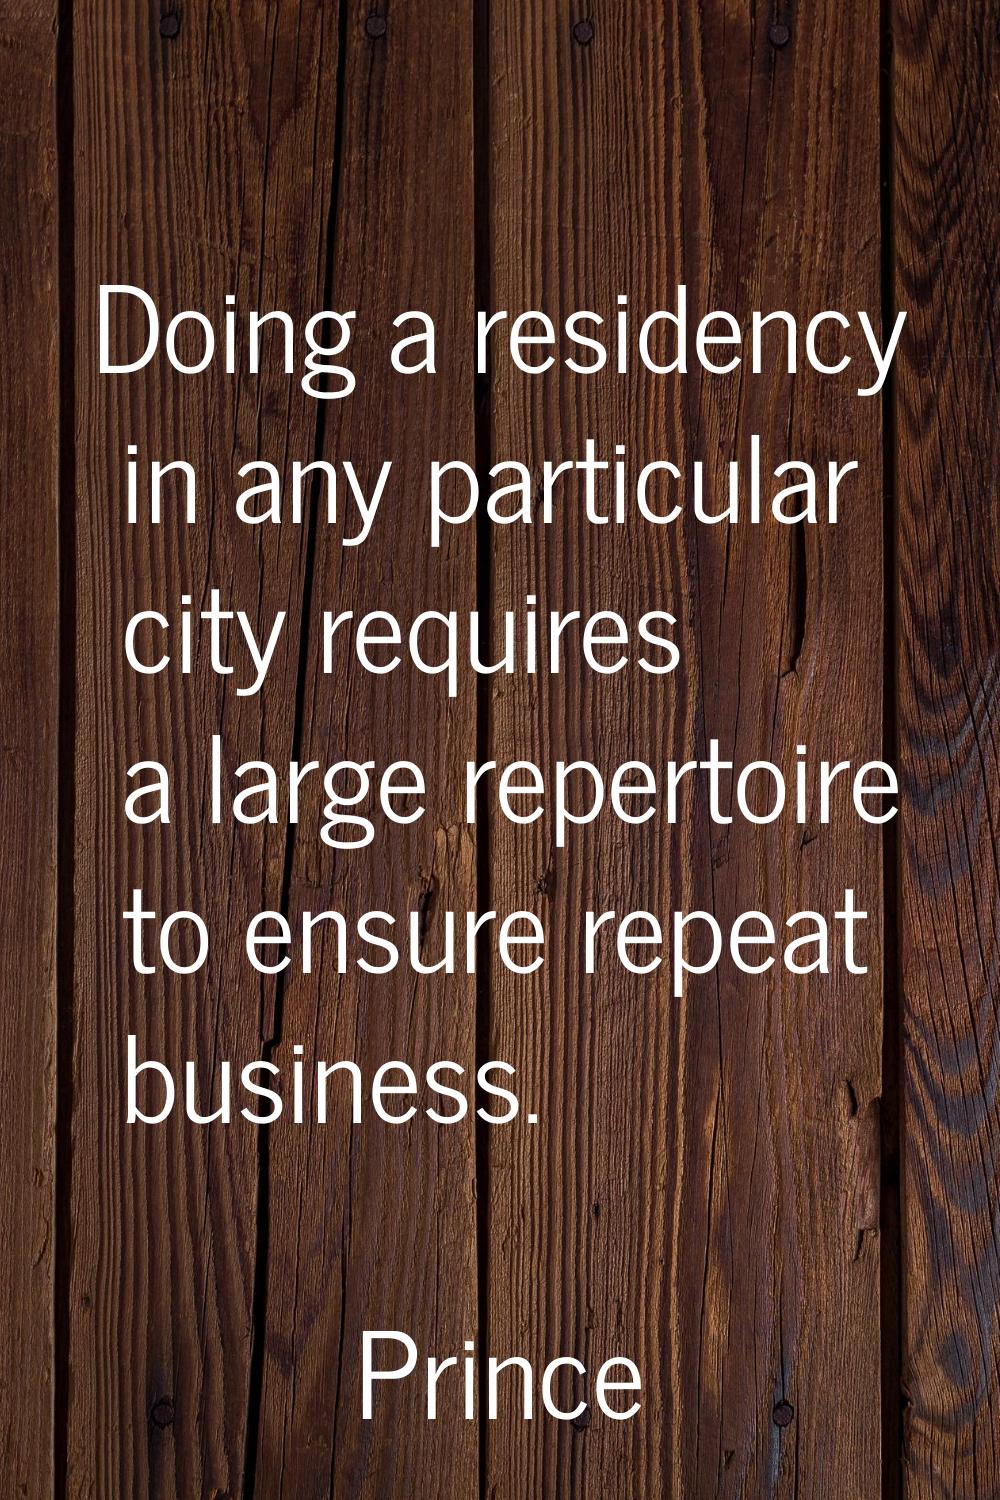 Doing a residency in any particular city requires a large repertoire to ensure repeat business.